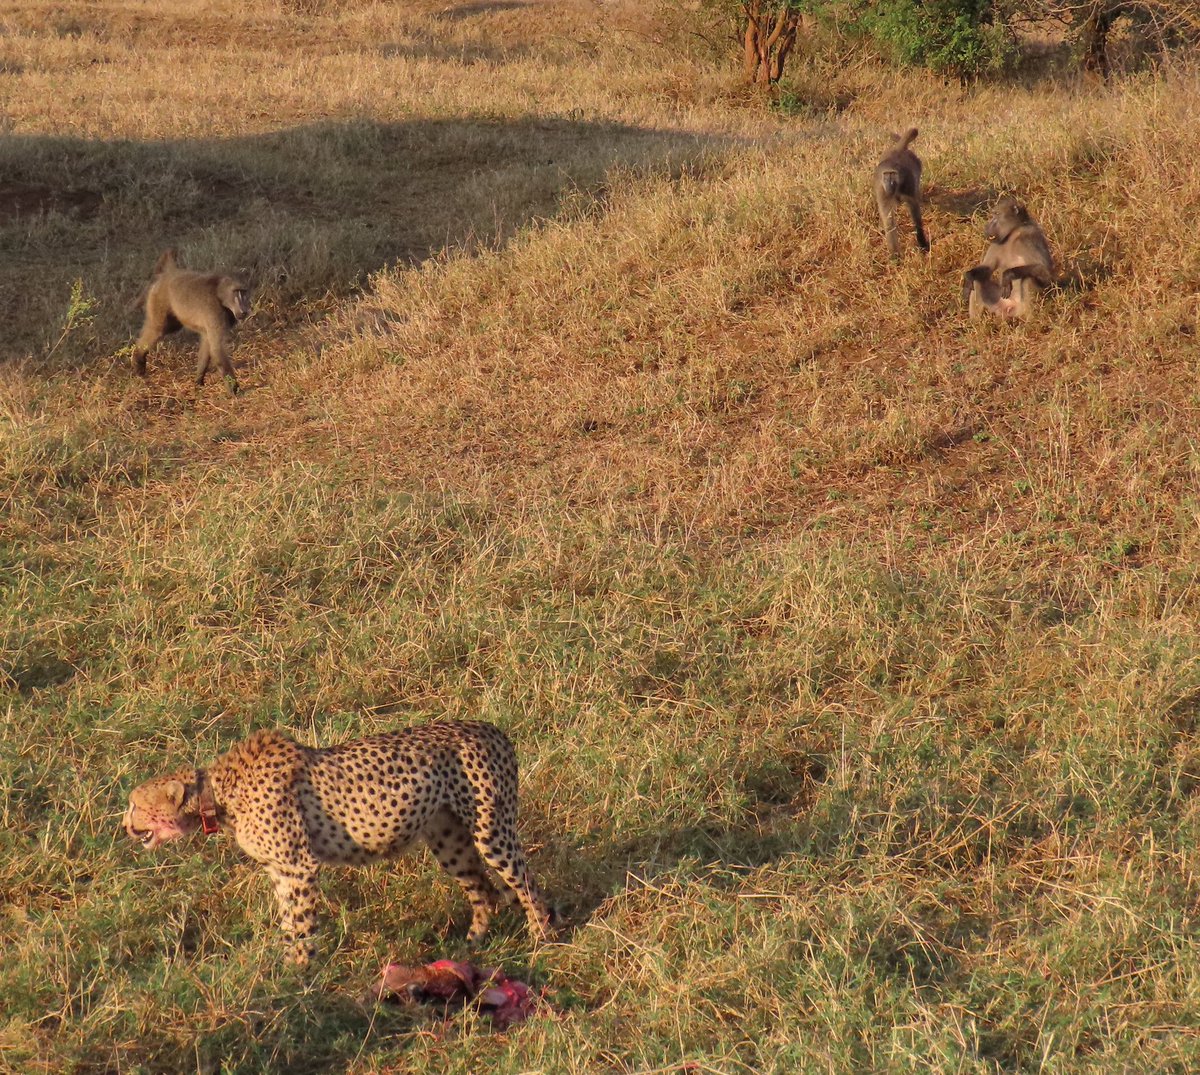 🚨 New @WildEcoLabNMU paper in #FoodWebs We report on trophic interactions between #cheetah & #baboon and suggest baboons could be an underreported source of food loss & kleptoparasitism! Thanks to @wildlifeact in Hluhluwe–iMfolozi for some great 📸! sciencedirect.com/science/articl…